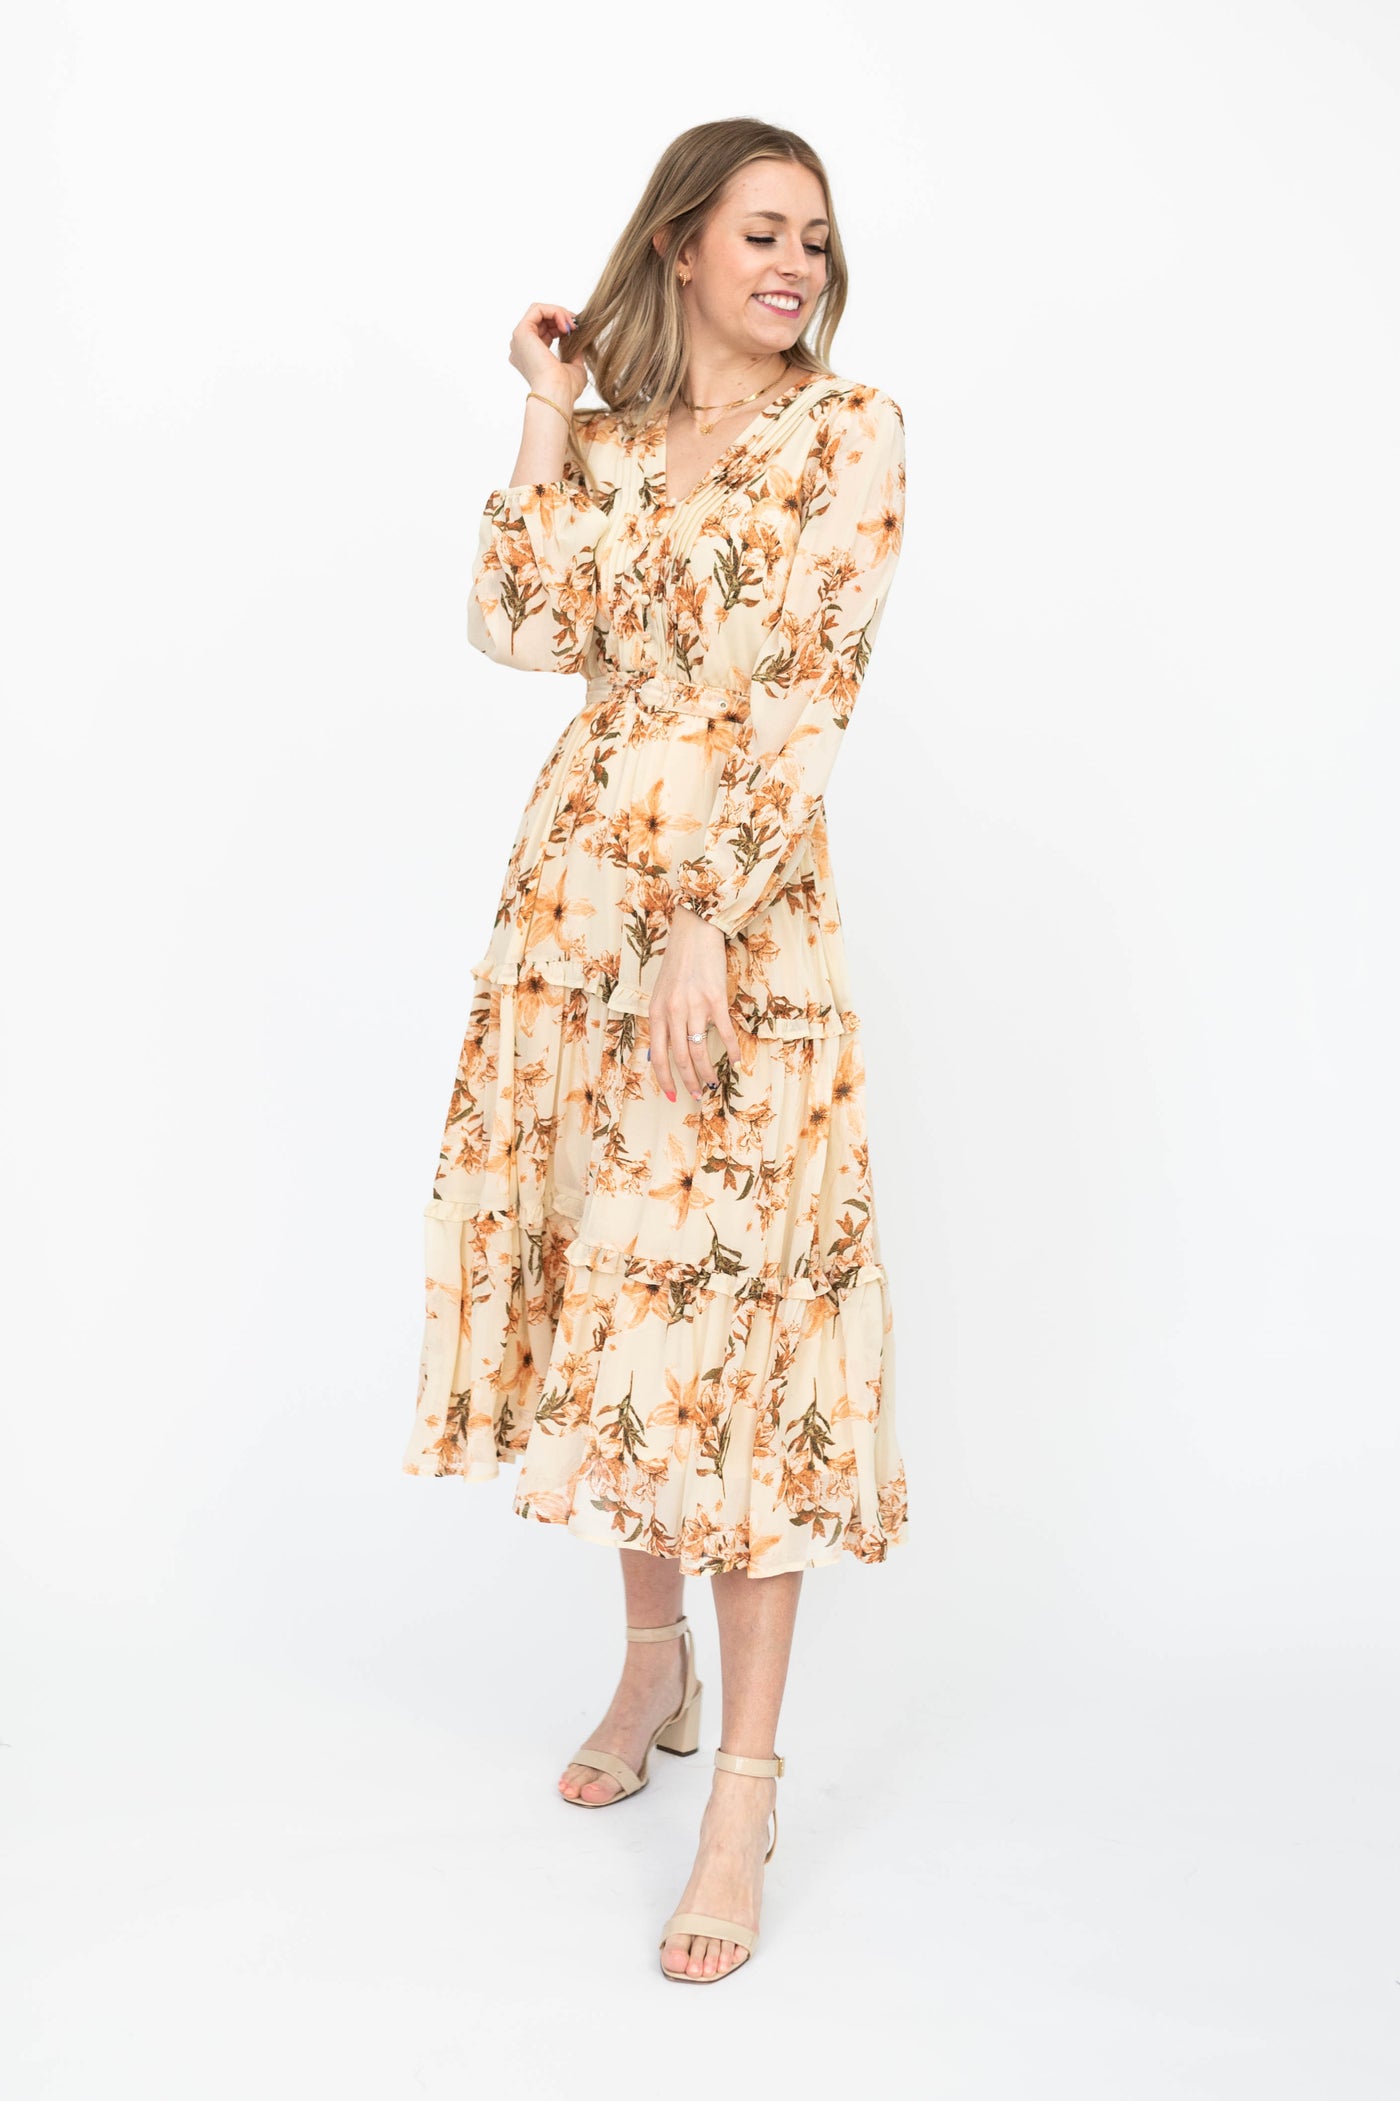 Long sleeve cream dress with floral pattern